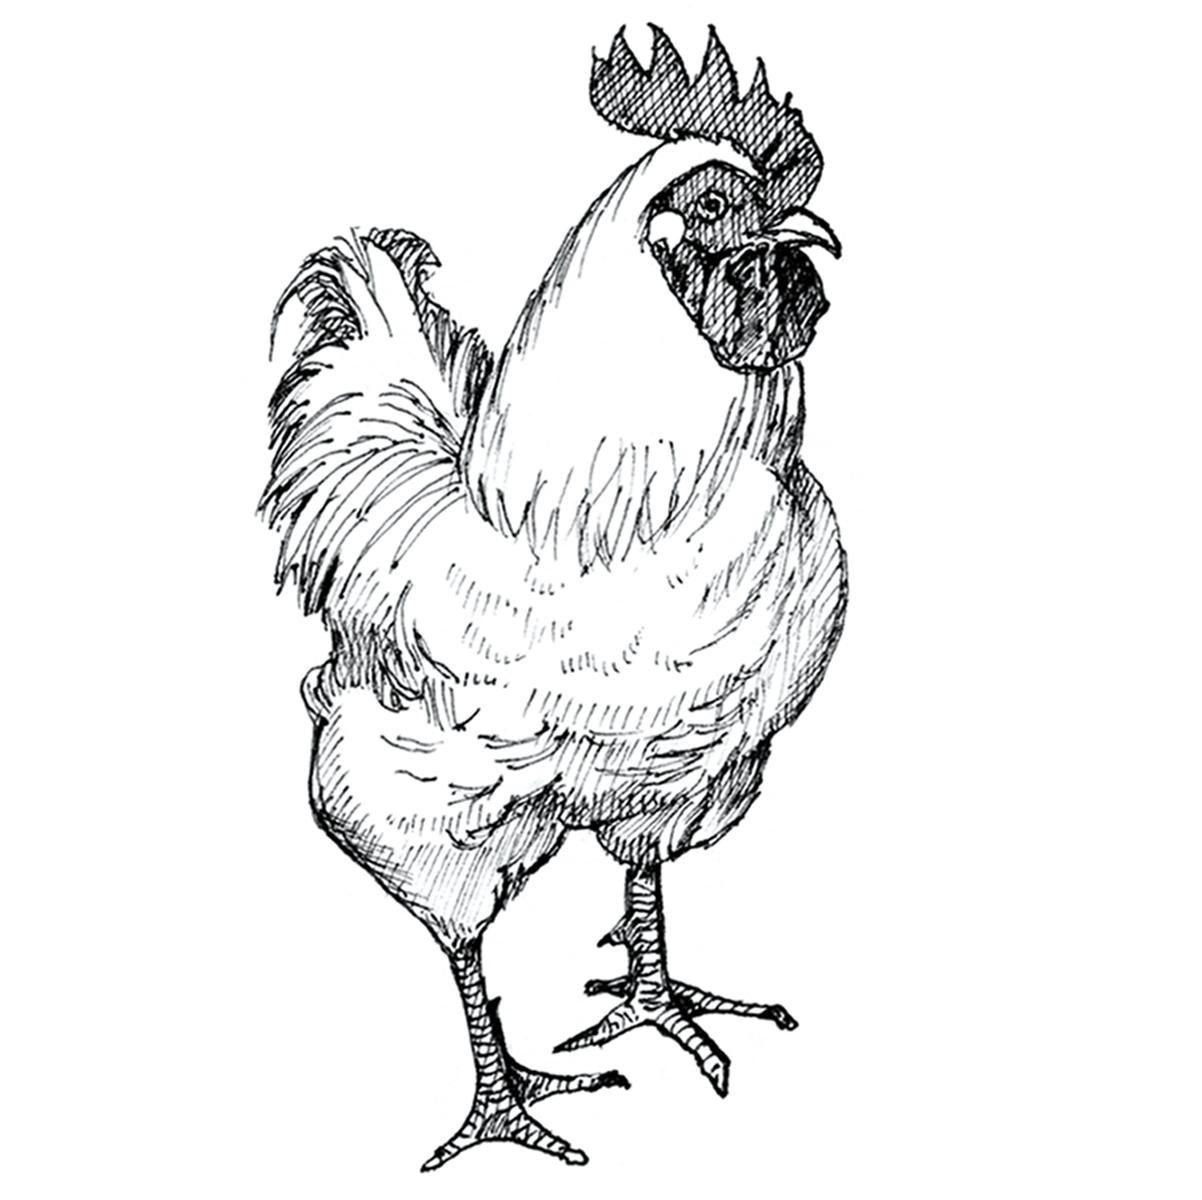 Limited edition print from pen and ink drawing of cockerel